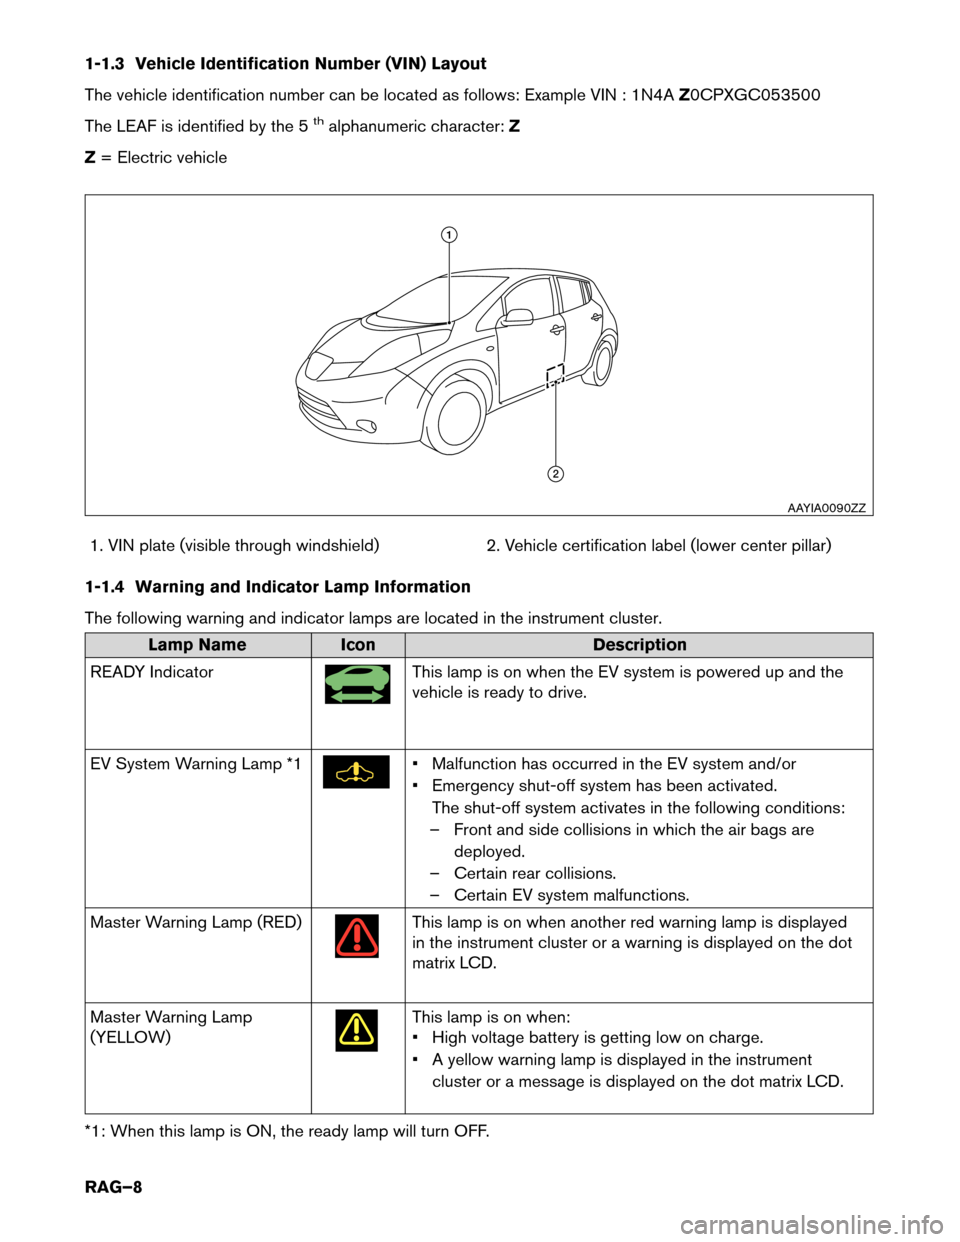 NISSAN LEAF 2016 1.G Roadside Assistance Guide 1-1.3 Vehicle Identification Number (VIN) Layout
The
vehicle identification number can be located as follows: Example VIN : 1N4A Z0CPXGC053500
The LEAF is identified by the 5
thalphanumeric character: